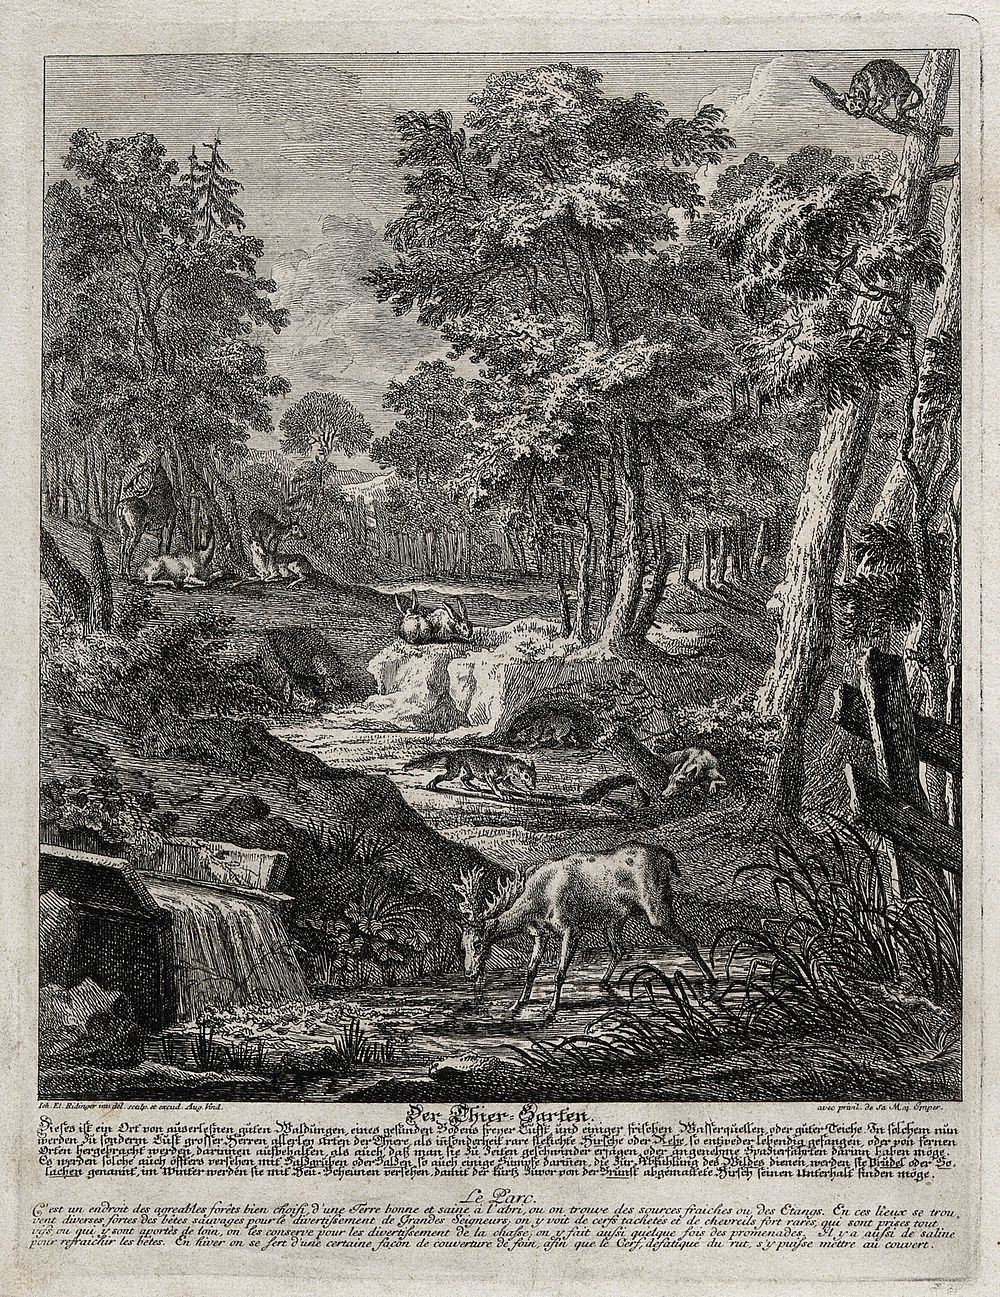 A menagerie with a stag at a watering place and foxes, hares, deer and a wild boar in the background. Etching by J.E.…